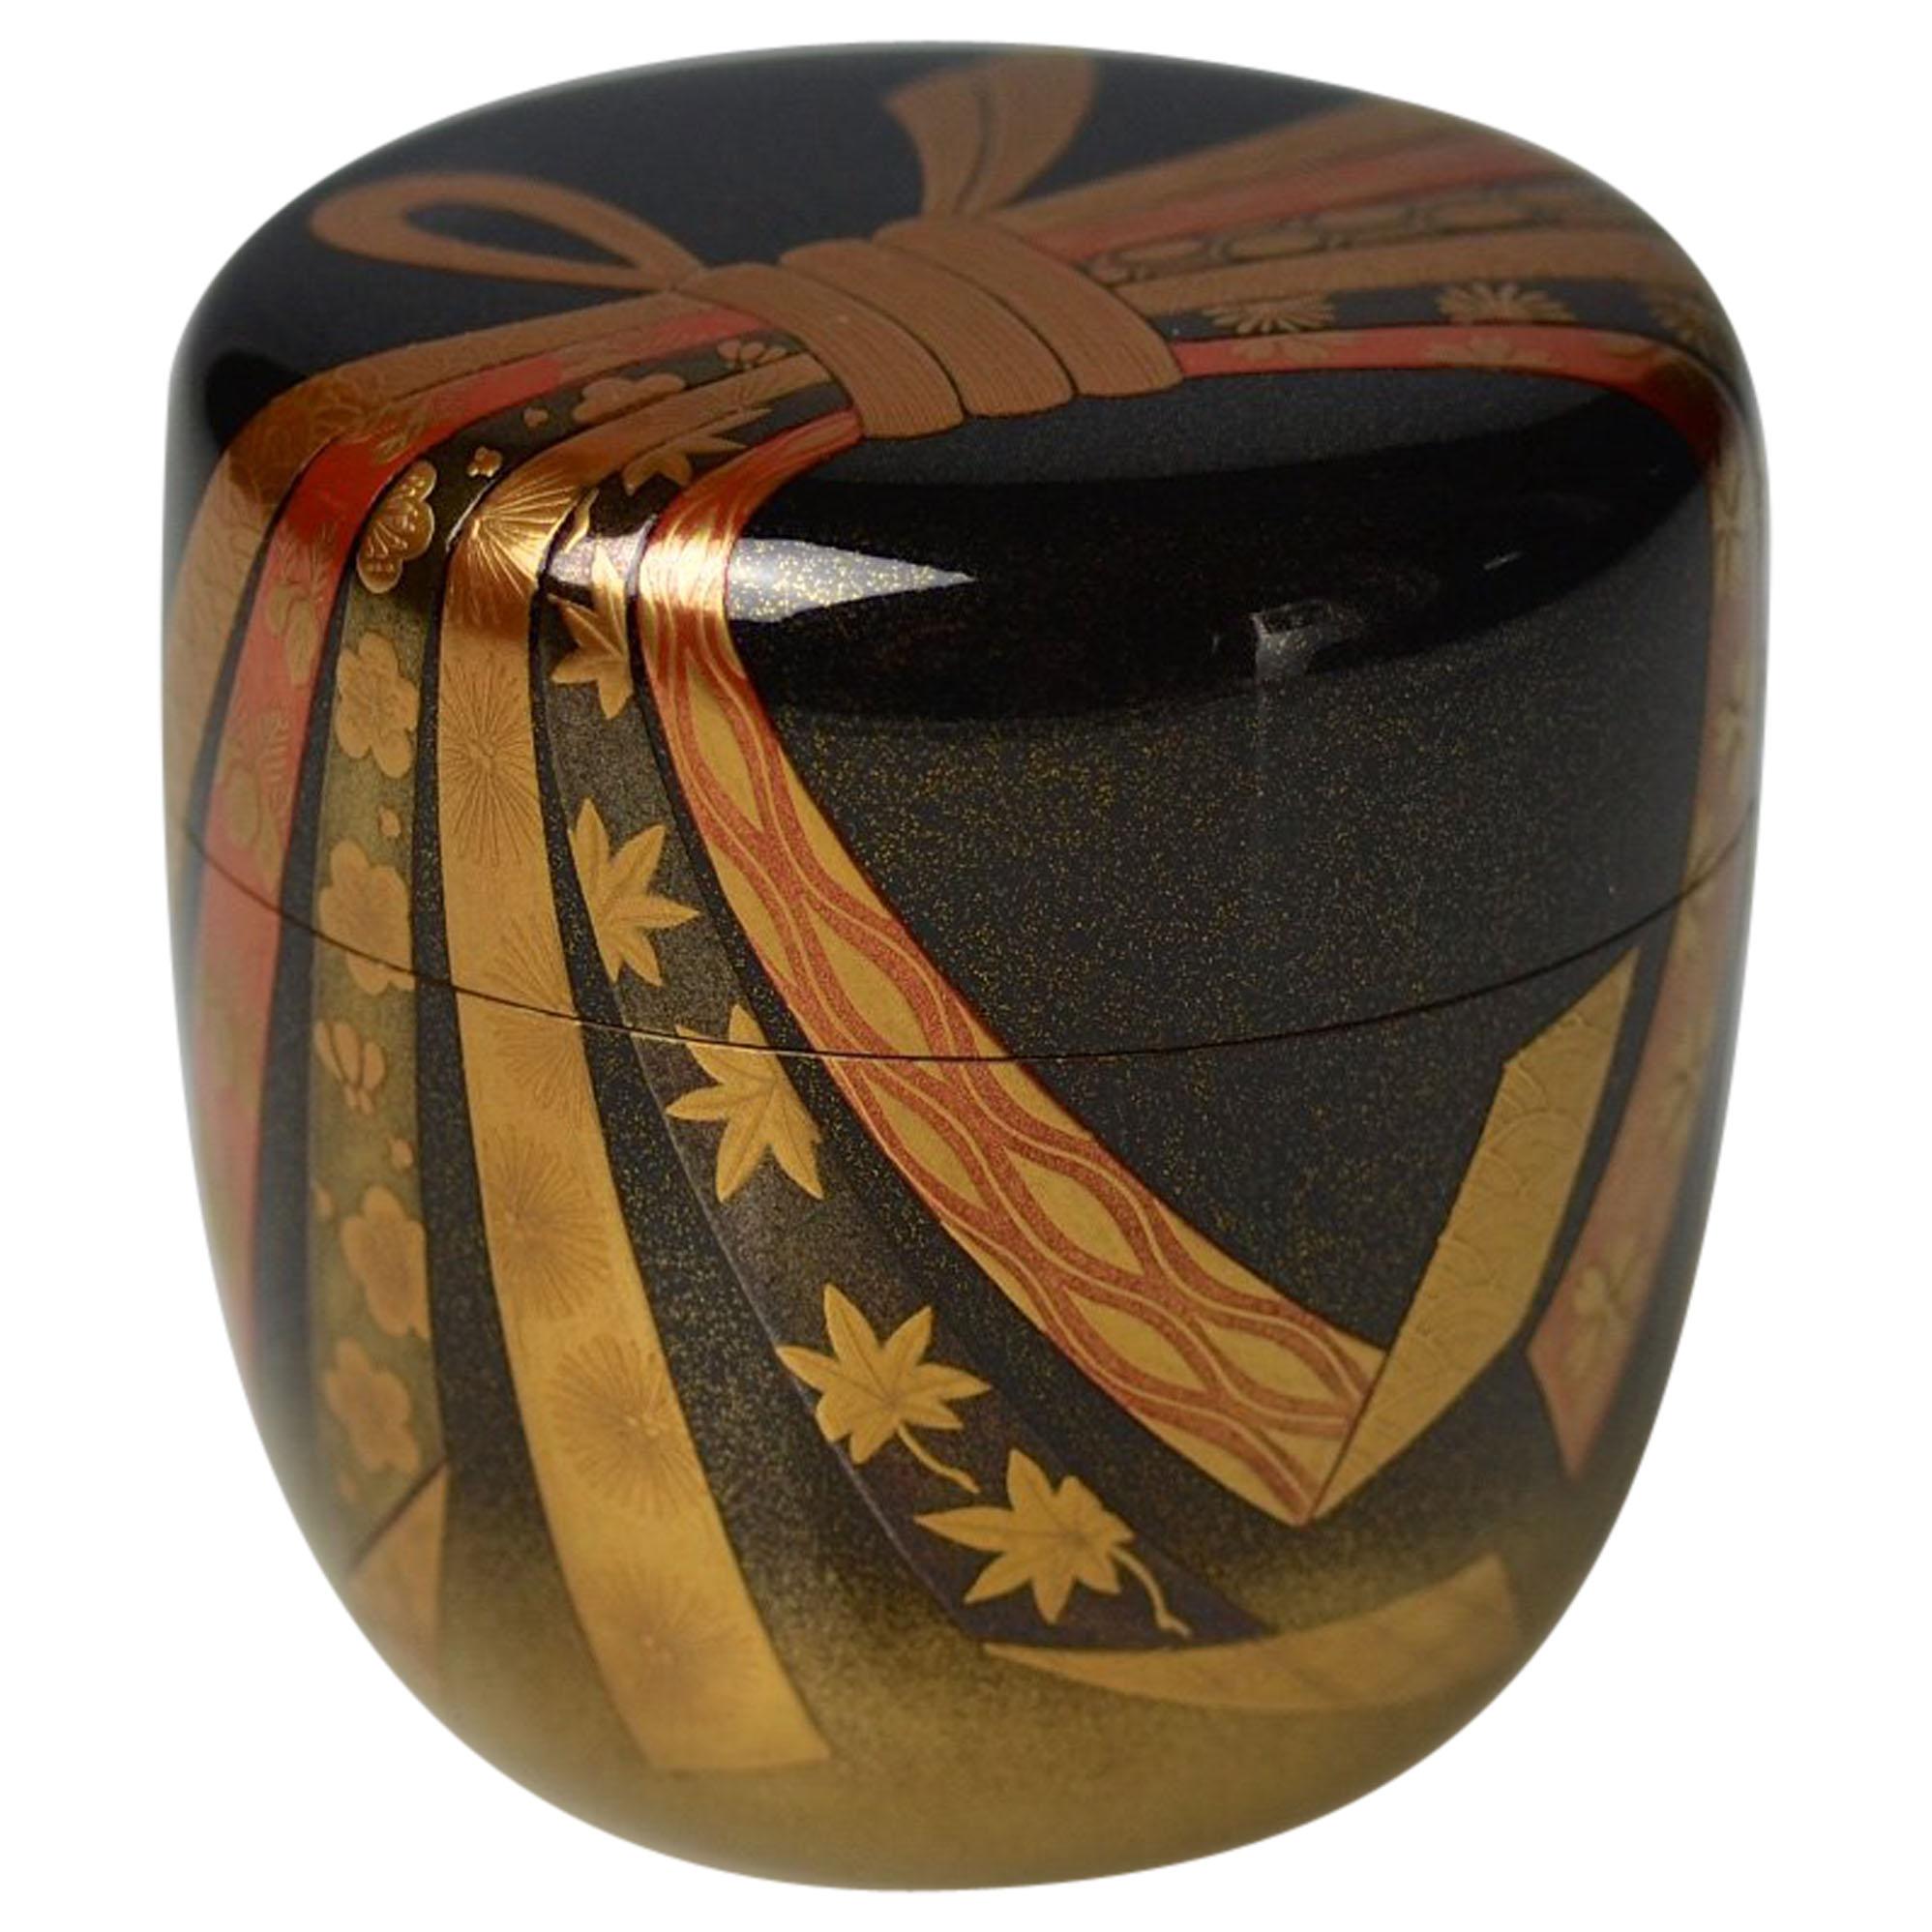 Gold Lacquer Tea Caddy (Natsume) with festive knot by Ichigo Itcho (1898-1991) For Sale